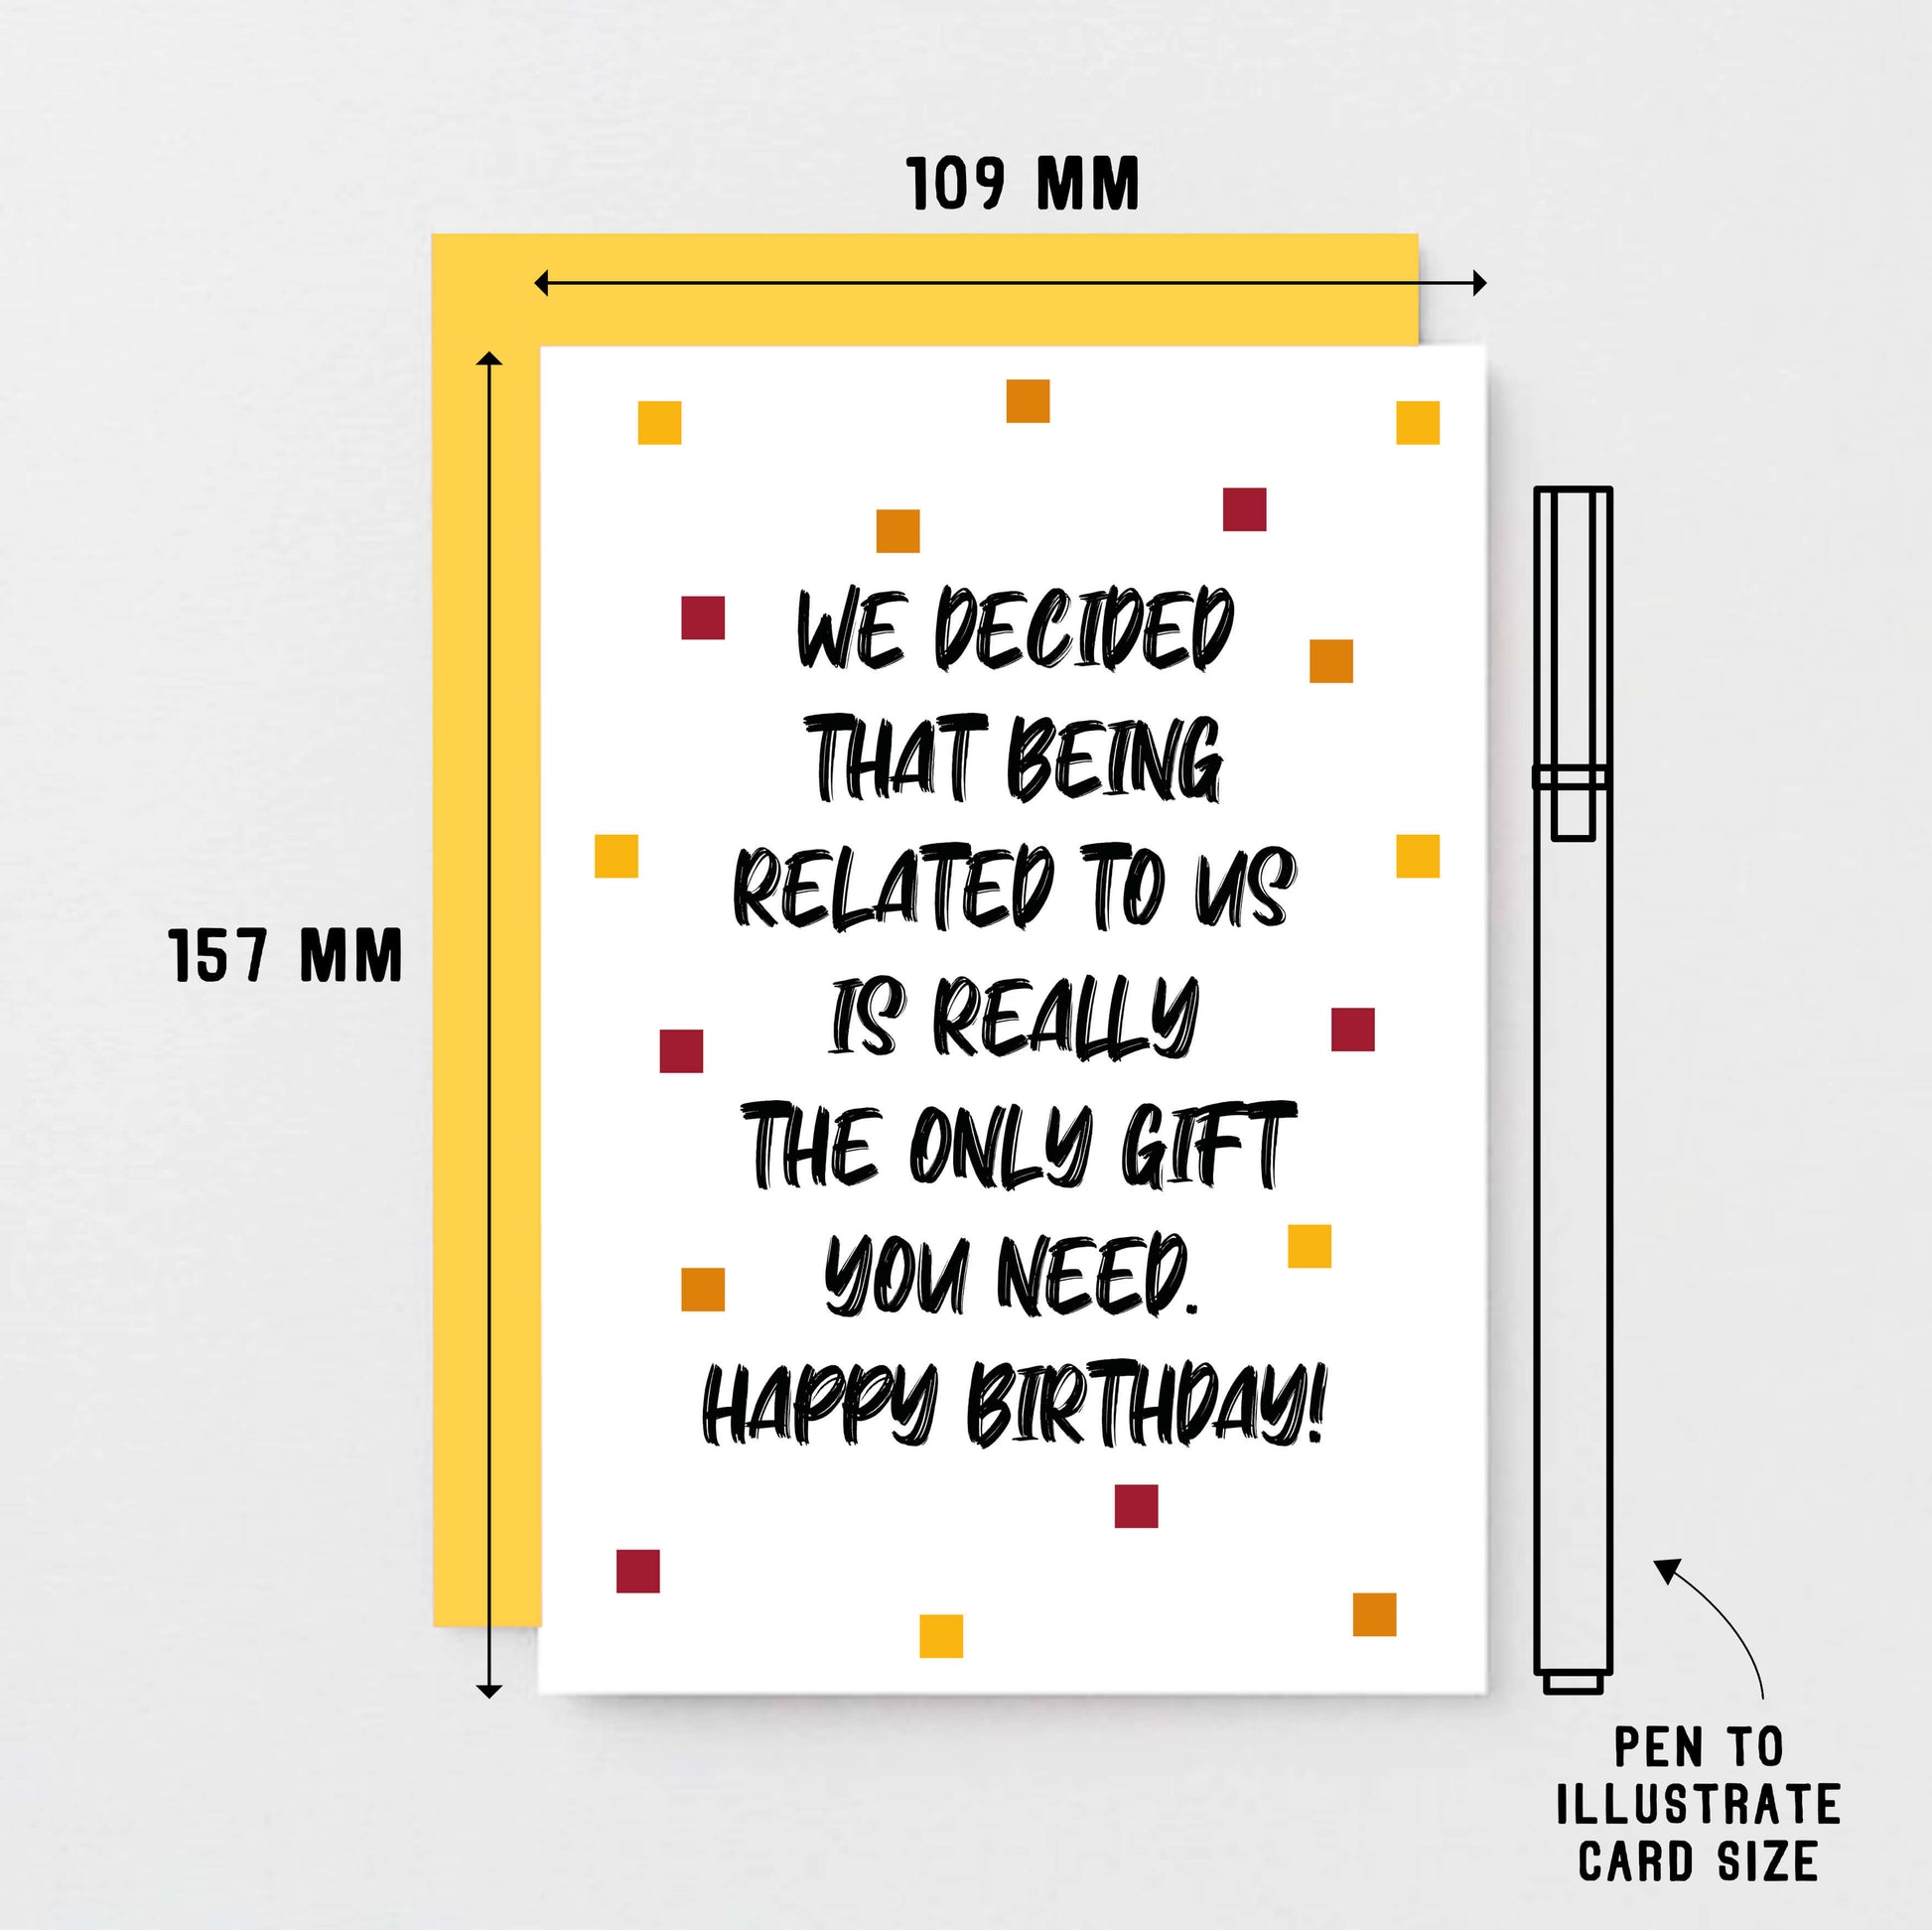 Birthday Card by SixElevenCreations. Reads We decided that being related to us is really the only gift you need. Happy birthday! Product Code SE1404A6